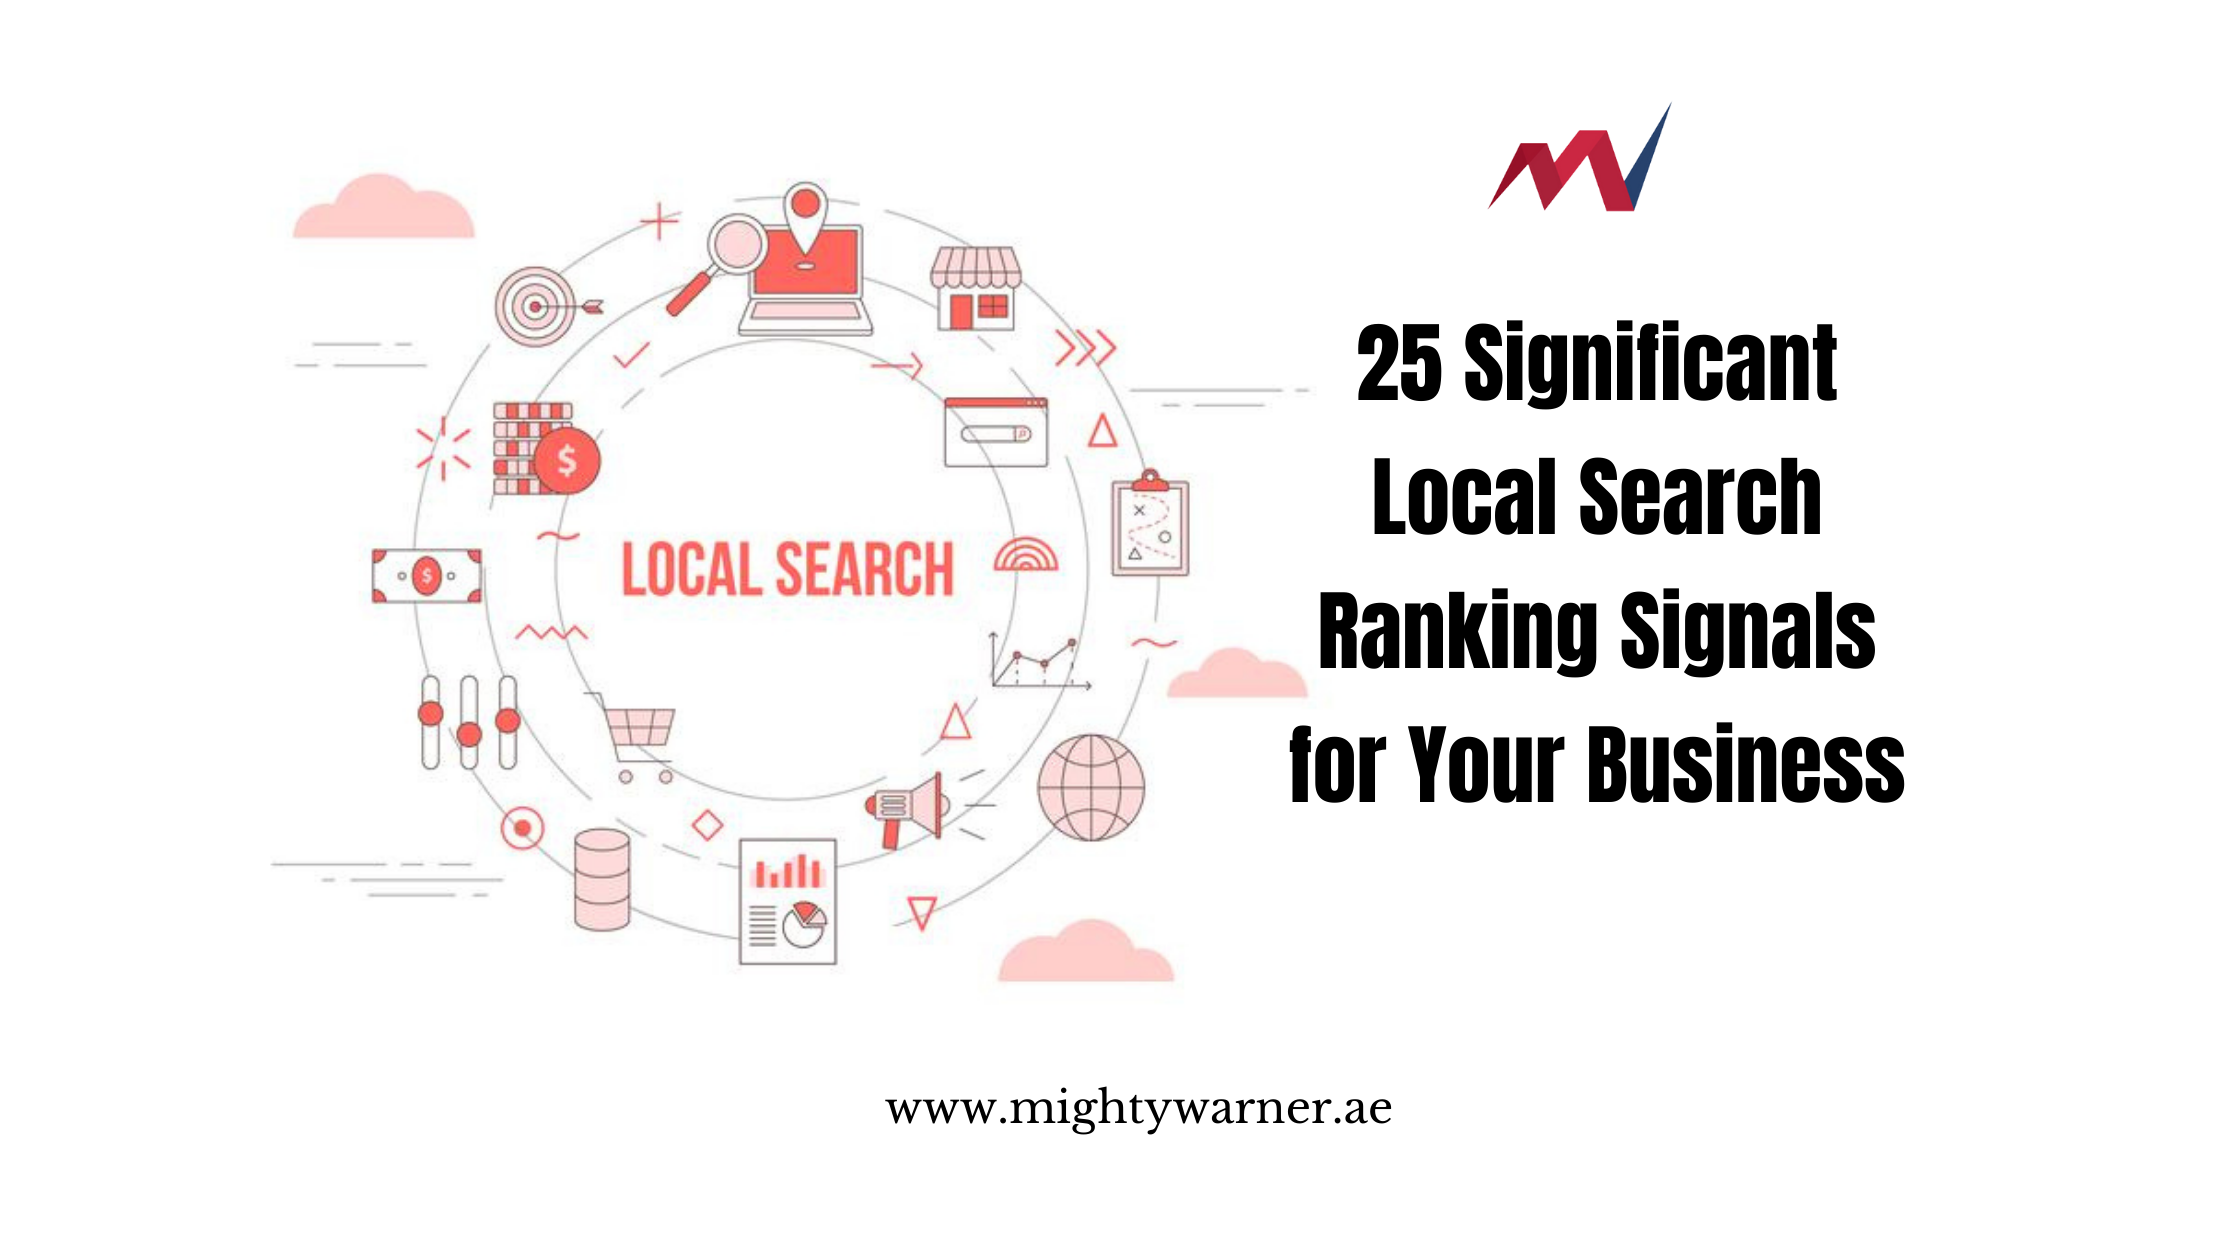 25 Significant Local Search Ranking Signals for Your Business